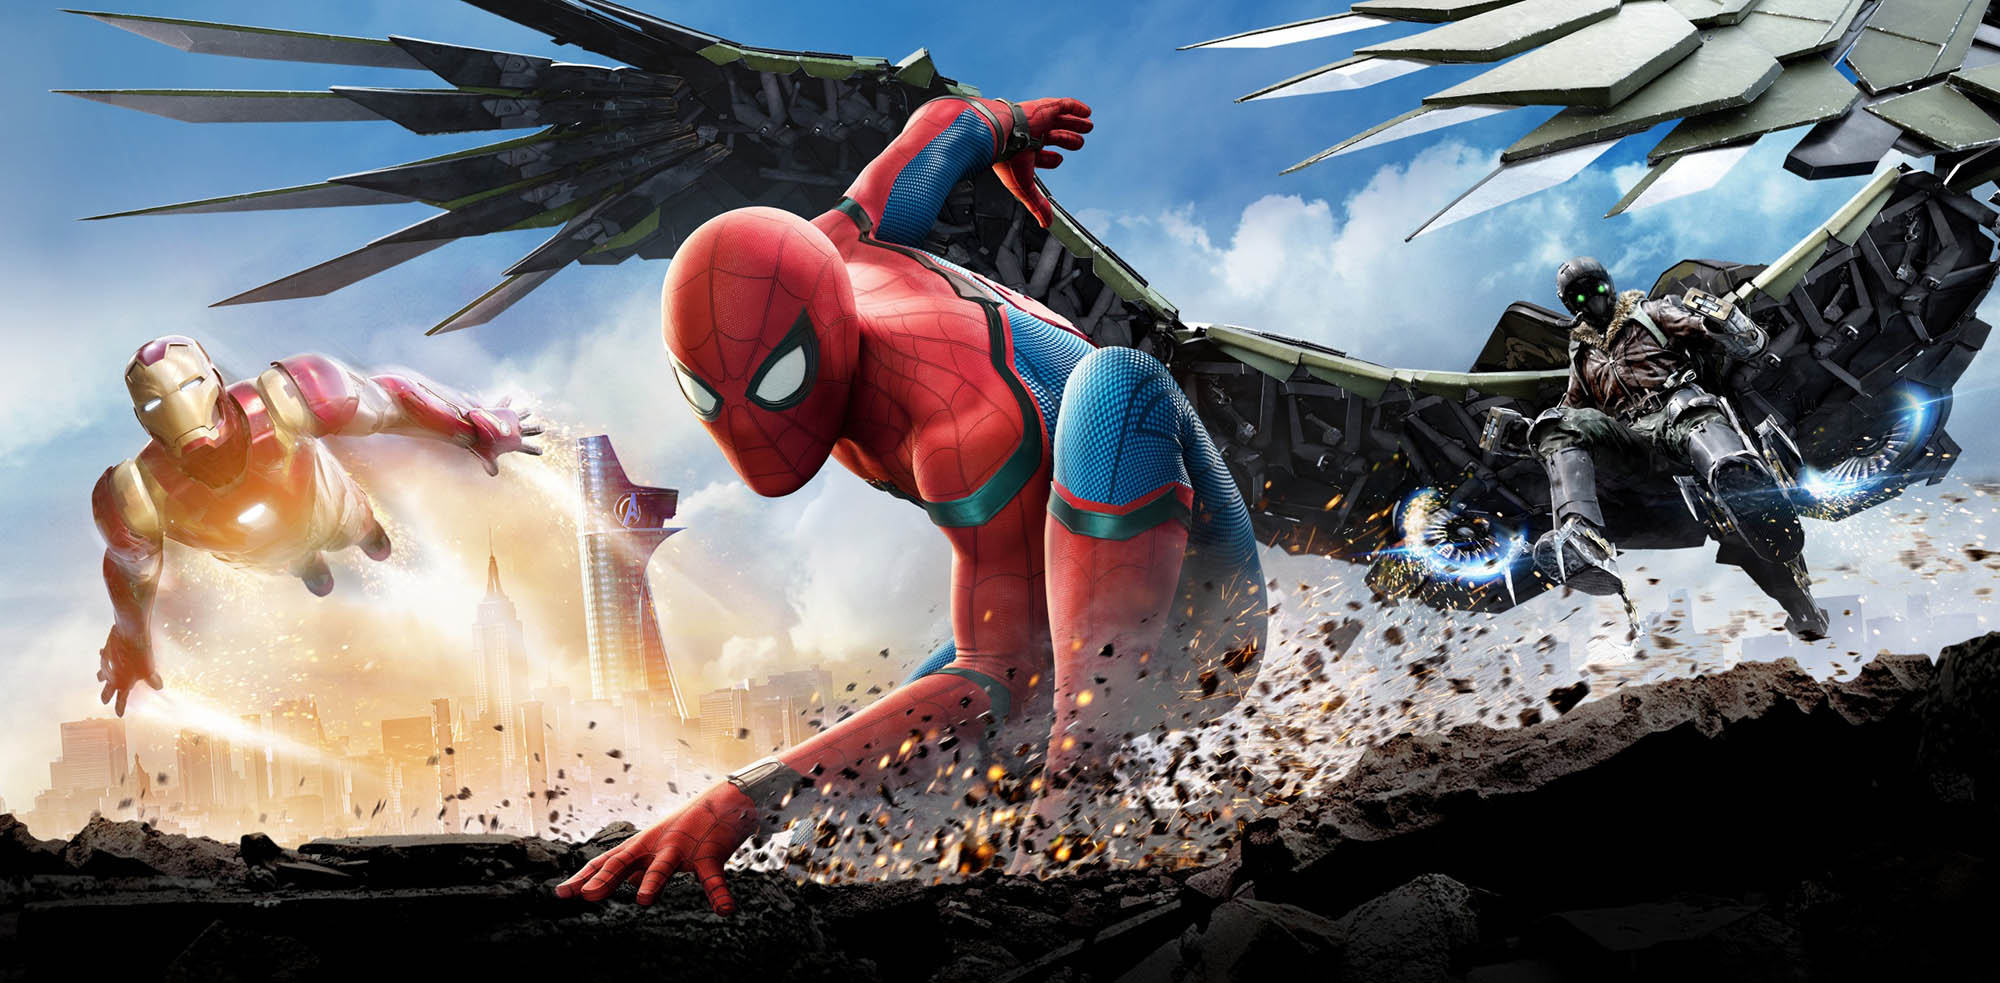 Stay hyped – here’s everything we know about the next movie from the web-slinging canon, 'Spider-Man: Far From Home'.